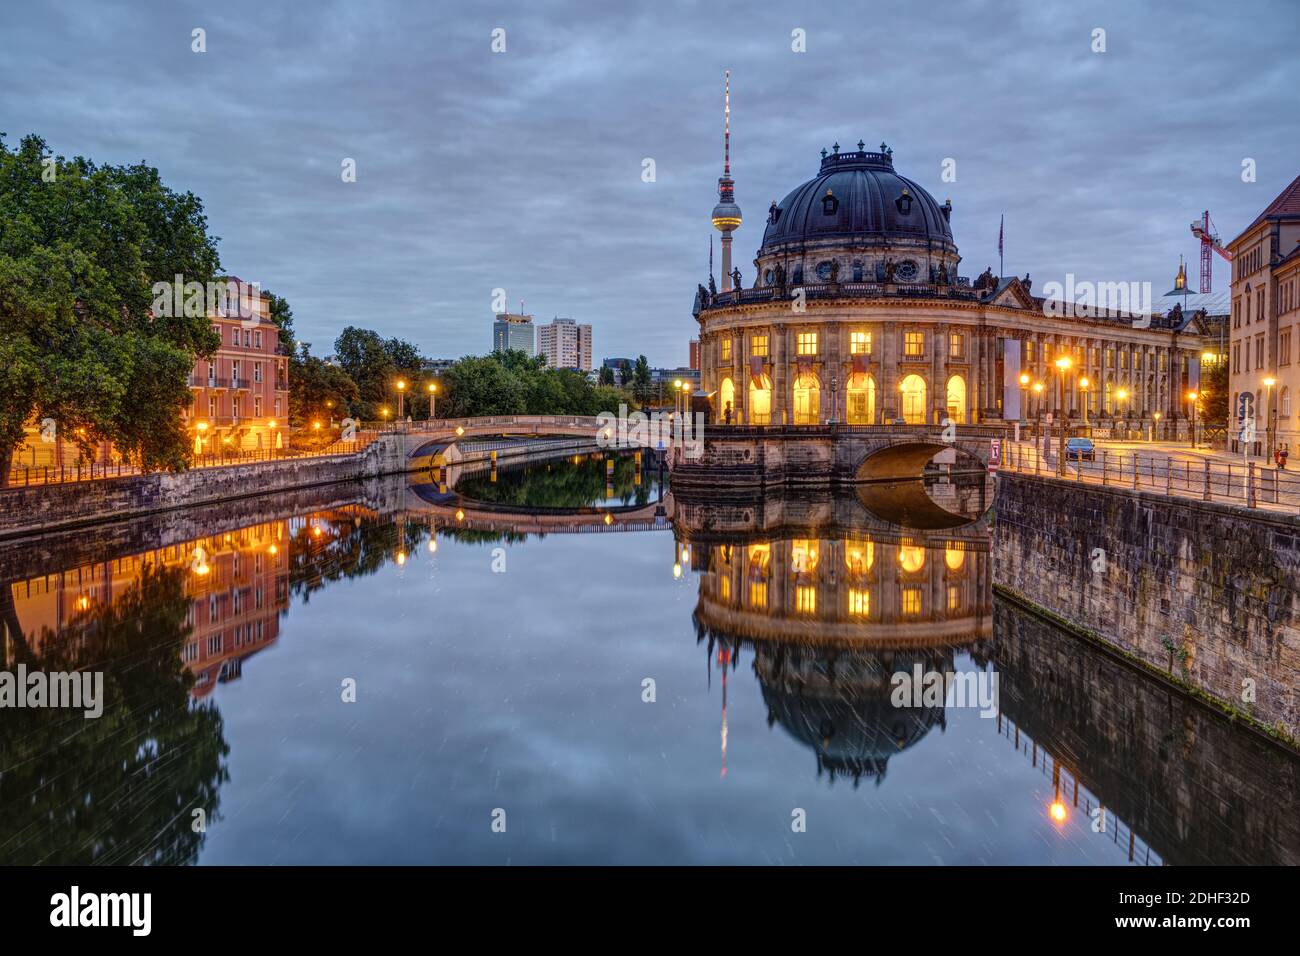 The Bode Museum and the Television Tower in Berlin on a cloudy morning Stock Photo